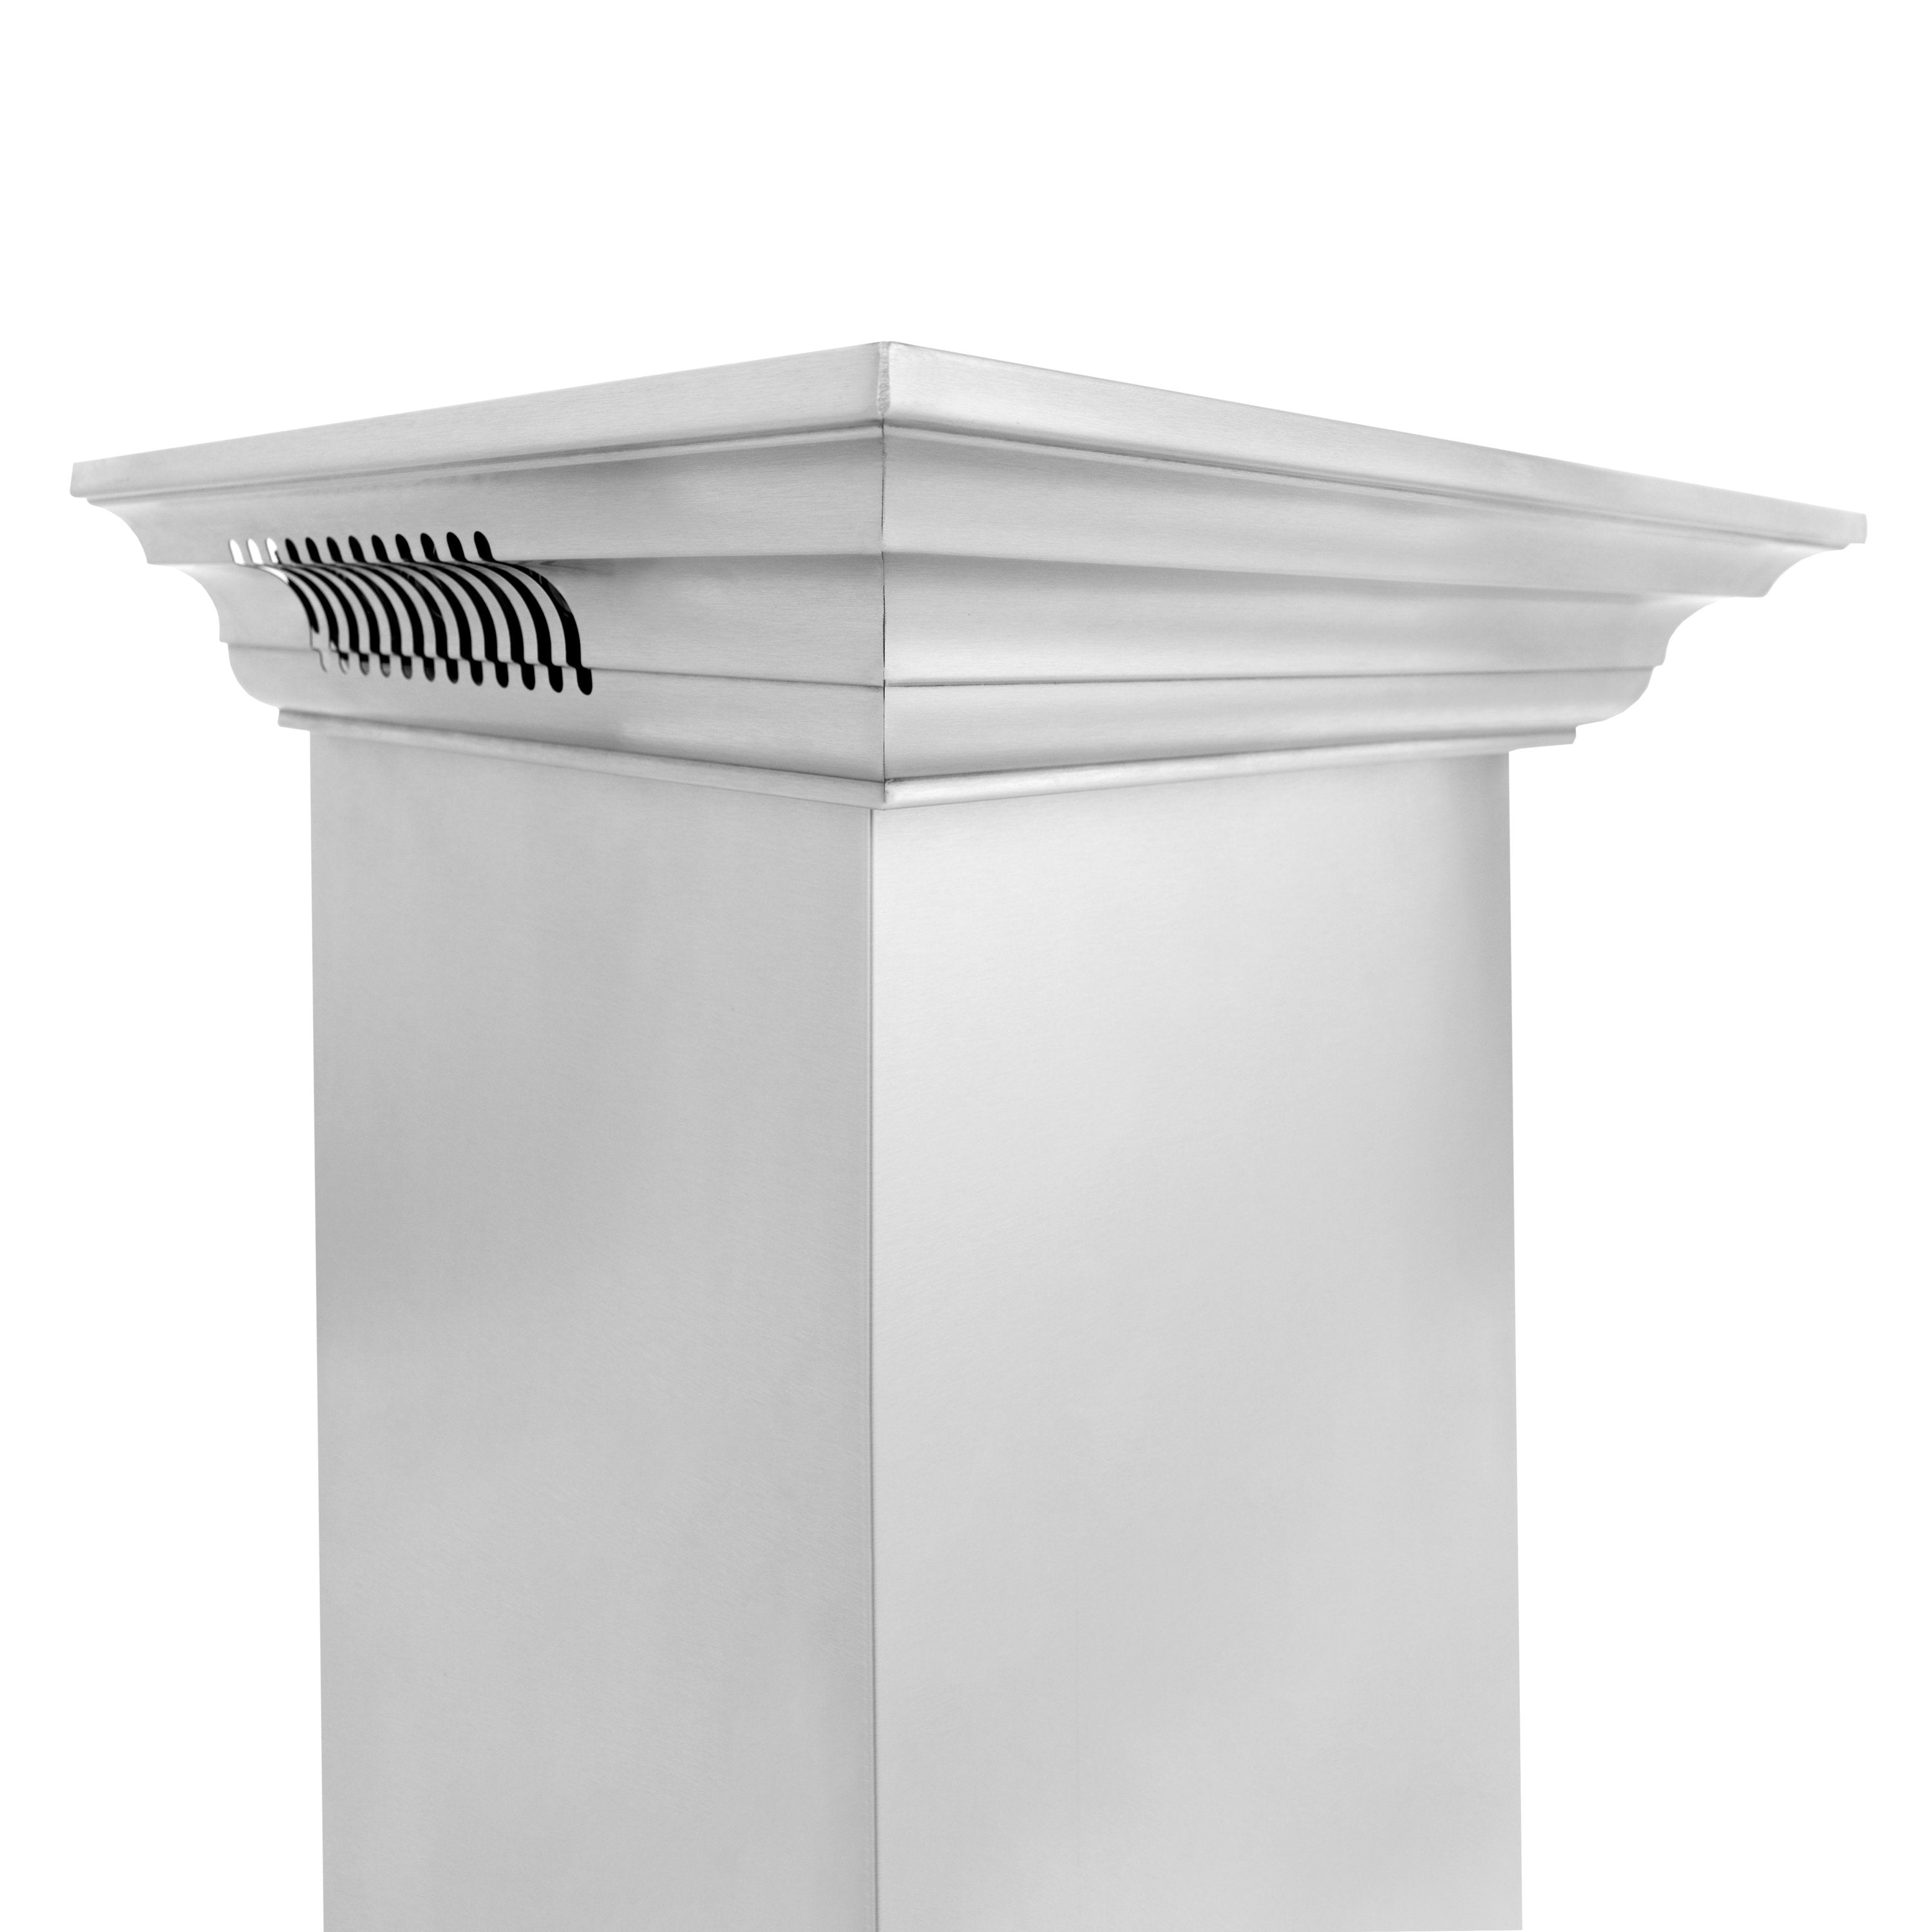 36" ZLINE CrownSound‚ Ducted Vent Wall Mount Range Hood in Stainless Steel with Built-in Bluetooth Speakers (697CRN-BT-36)